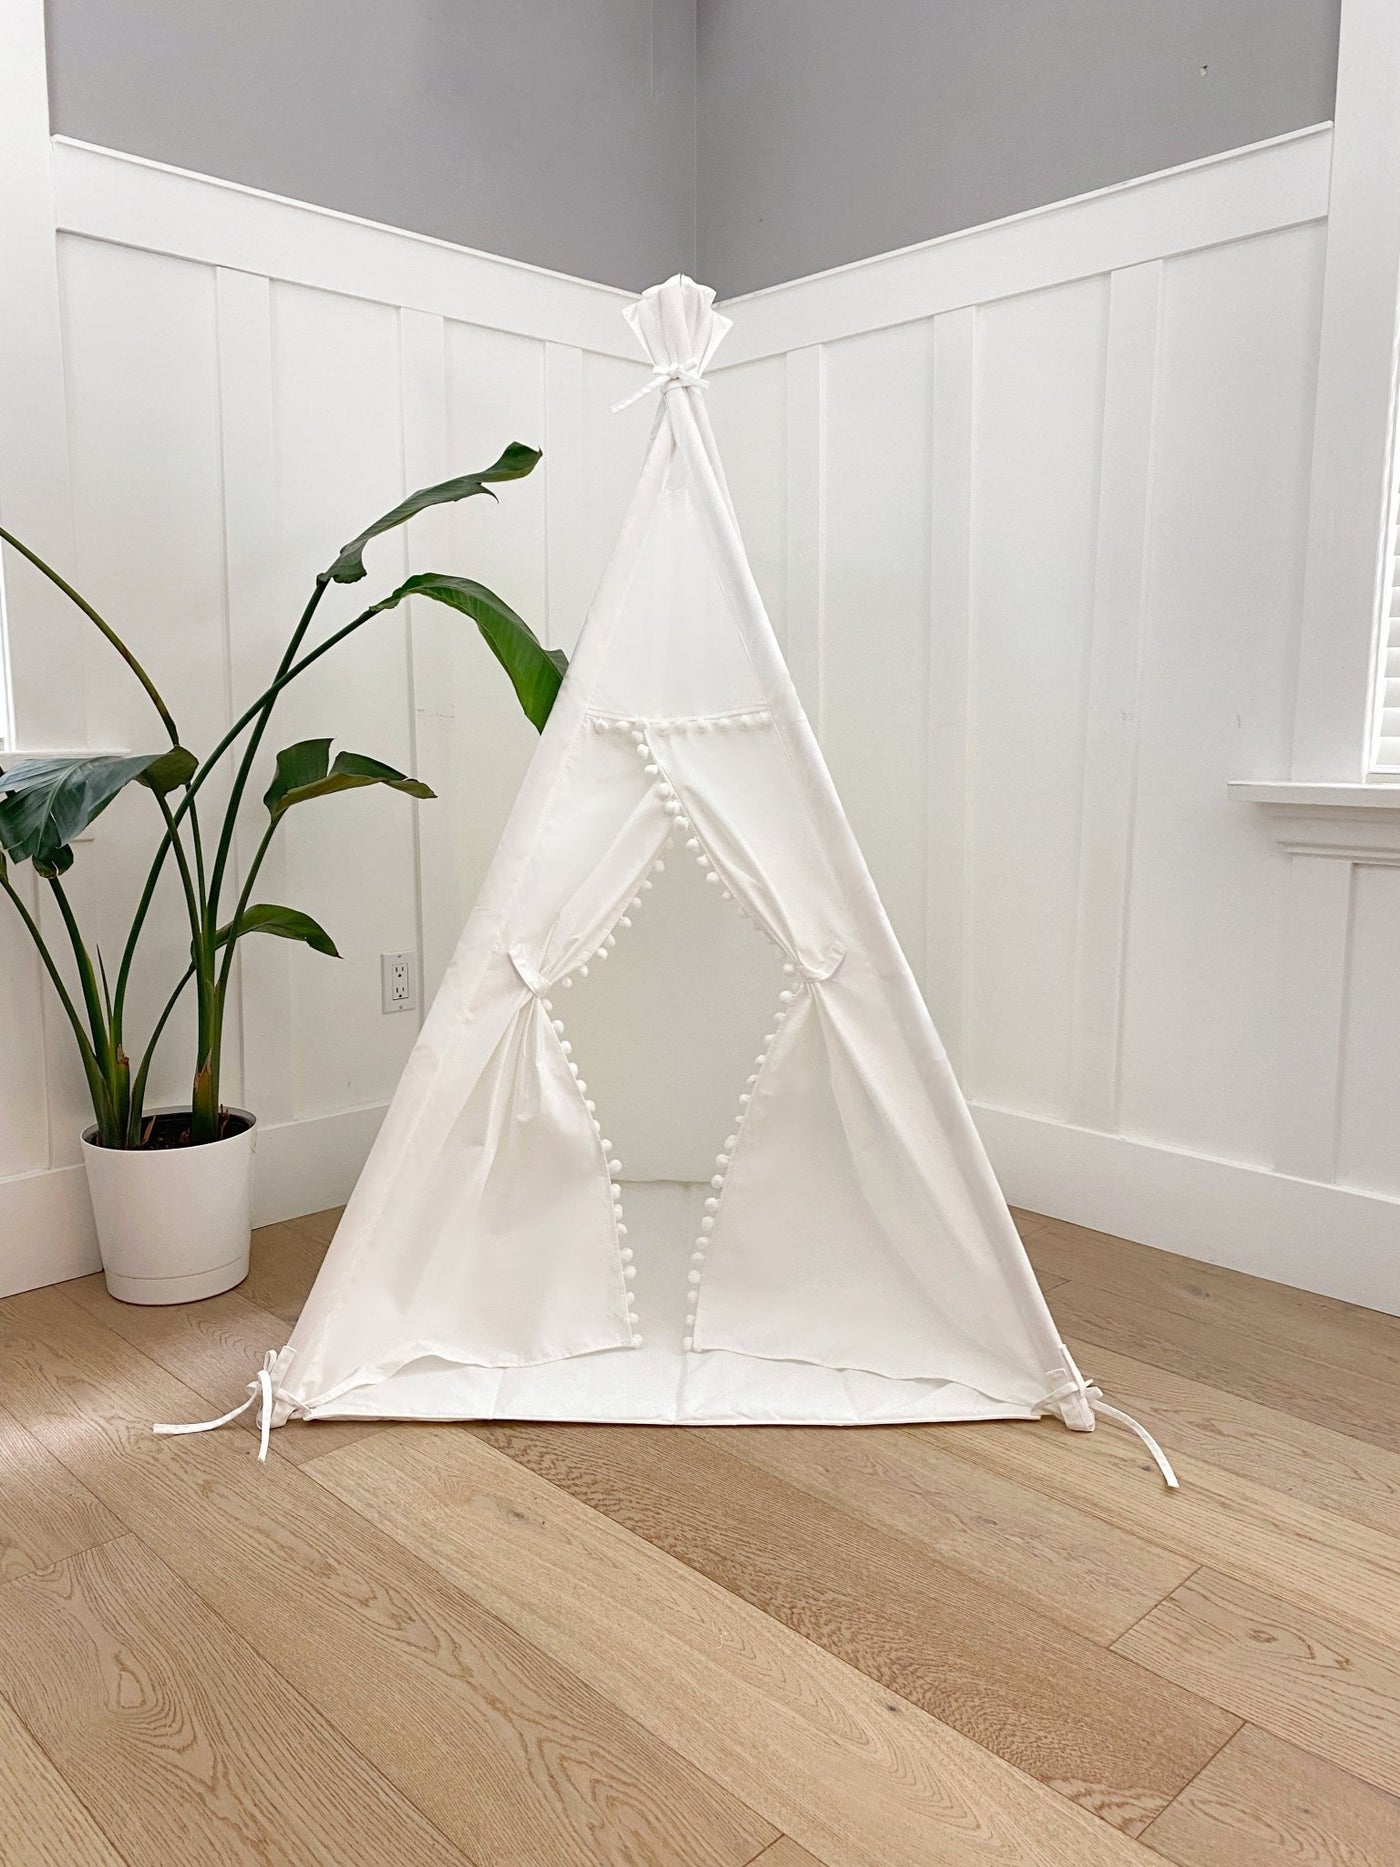 Handmade Kids Play Tent in Cotton Canvas